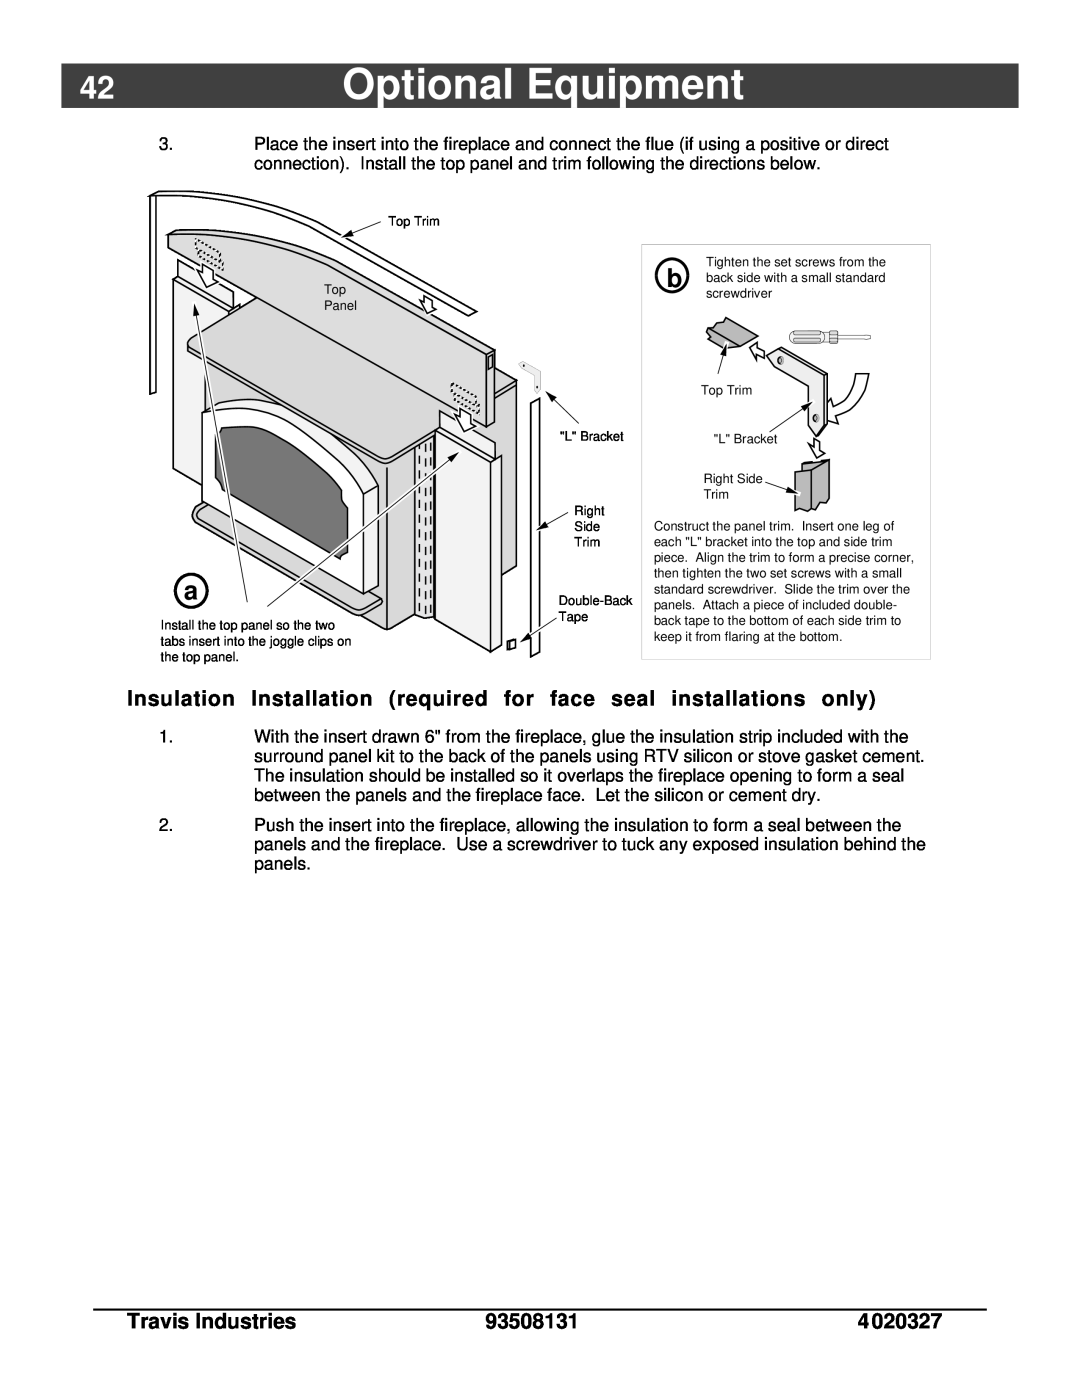 Lopi Answer Wood Stove owner manual Optional Equipment, Travis Industries, 93508131 